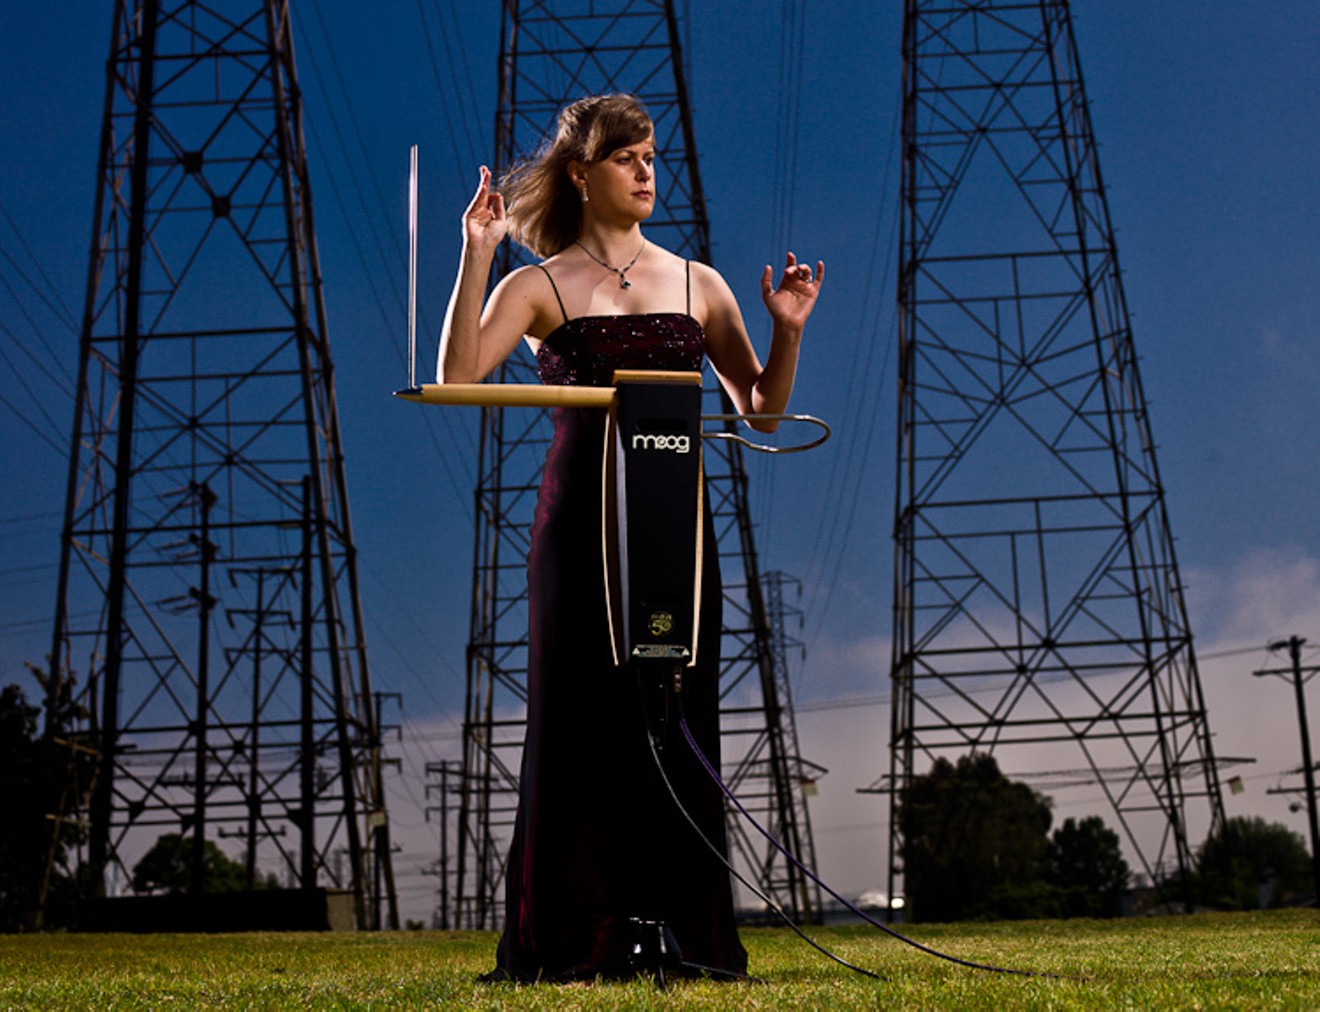 Hollywood theremin player Lara Wickes will be in town for two performances this month.